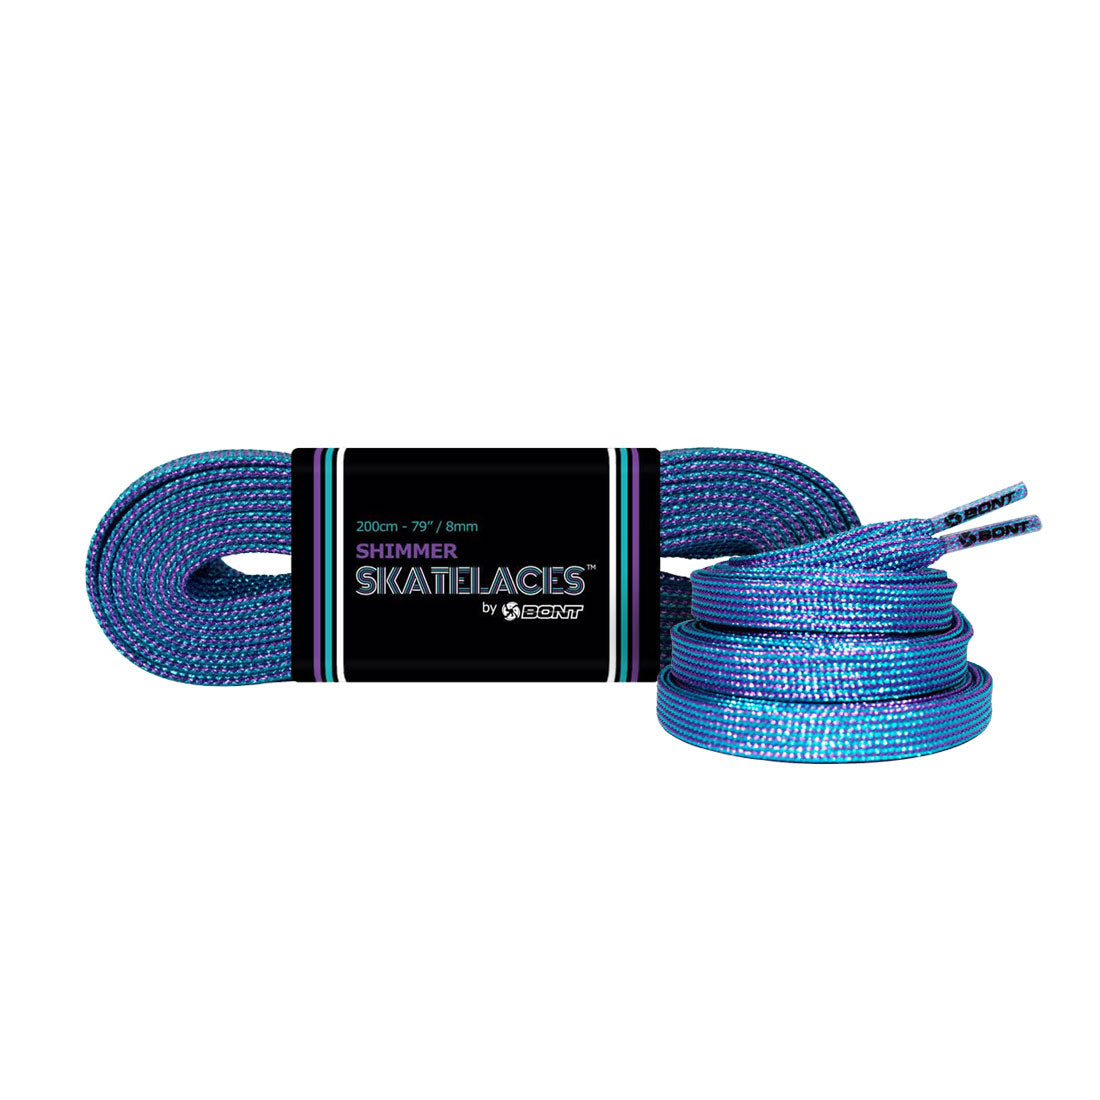 Bont Shimmer 8mm Laces - 200cm/79in Mermaid Dream Laces